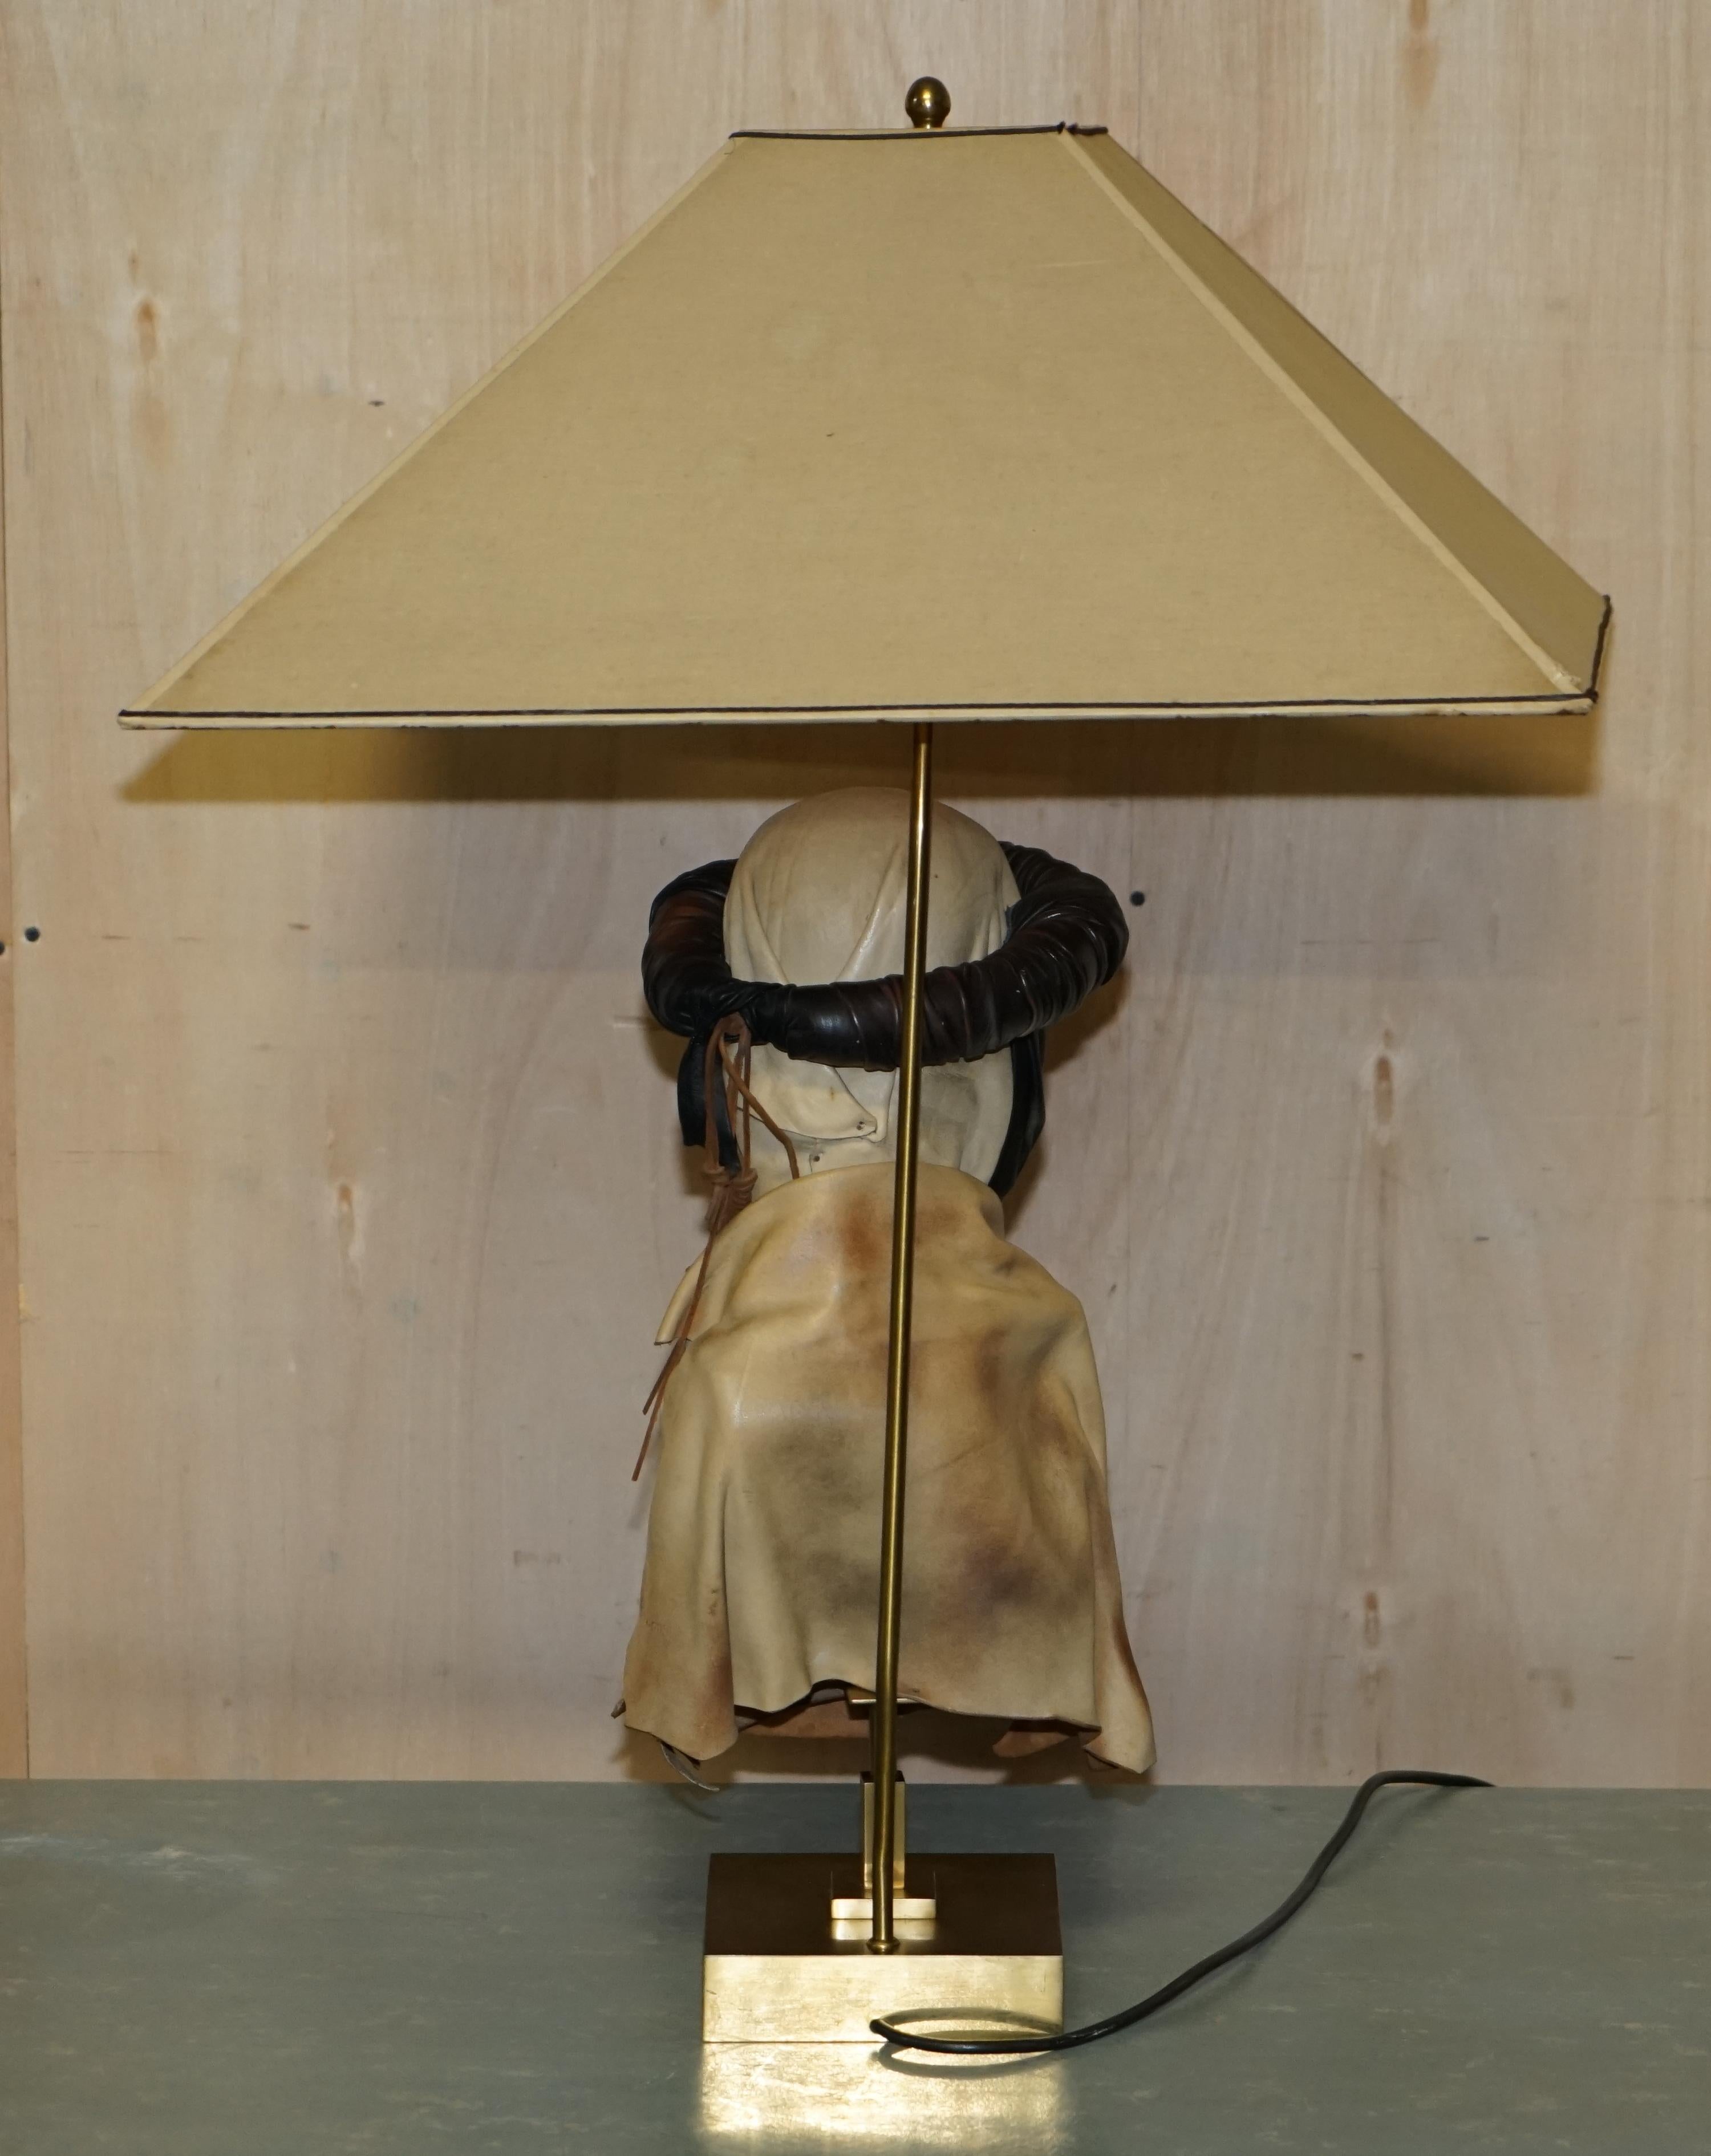 Midcentury Arabian Face Lamp Signed Pourbaix circa 1960s Must See Pictures For Sale 8